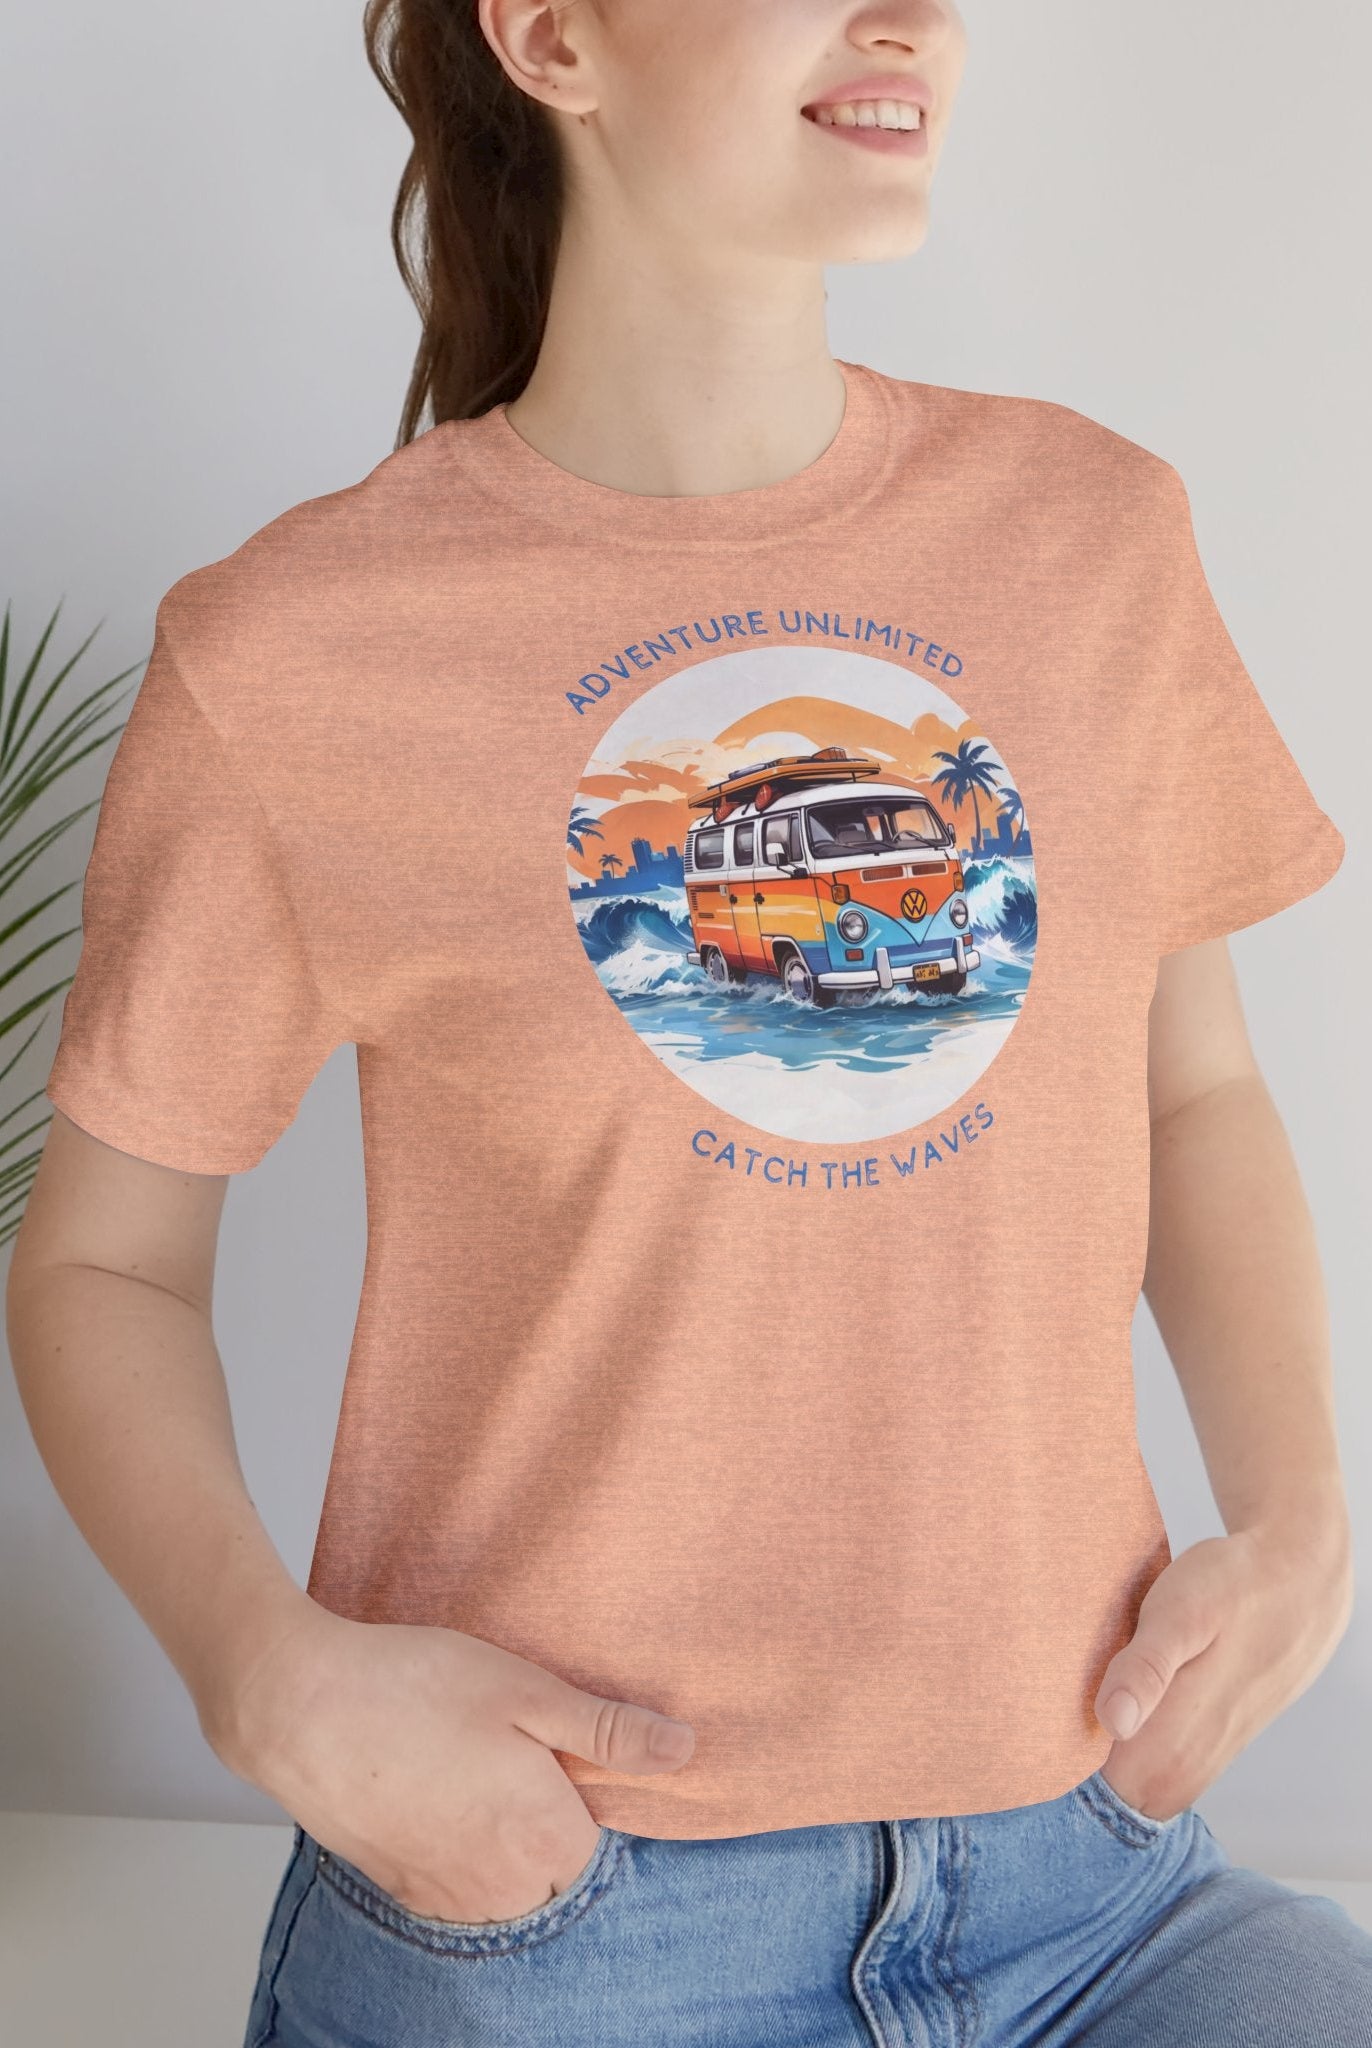 Adventure Unlimited Surfing T-Shirt with Van and Palm Trees Graphic - Printed on Bella & Canvas EU Direct-to-Garment Item